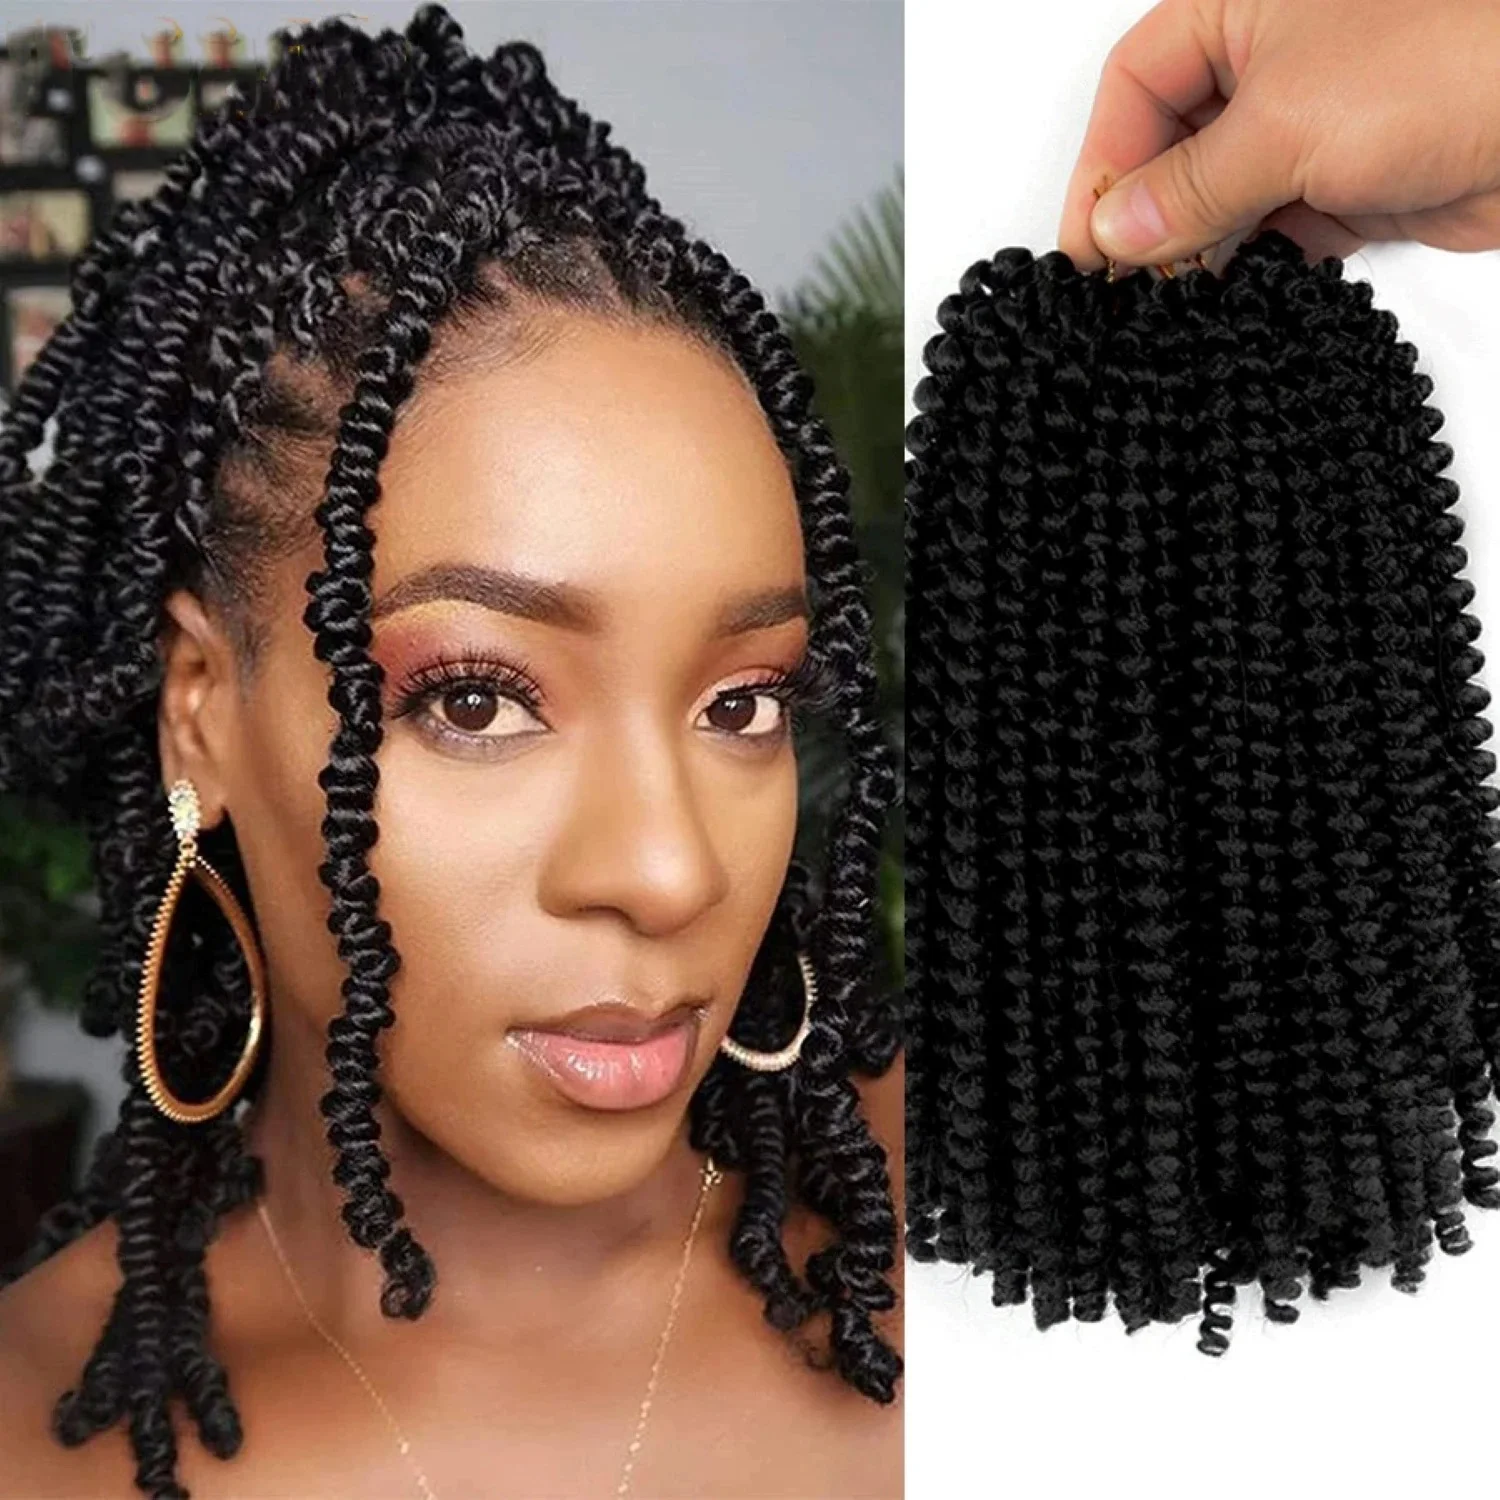 Ombre Spring Twist Hair Synthetic Crochet Braids Passion Twist 8Inch Pre-Twist Crochet Hair Extensions 30Roots Bomb Twist natifah ombre hair extensions crochet spring twist 8 inch 100g crochet braid synthetic braiding hair pre stretched passion twist